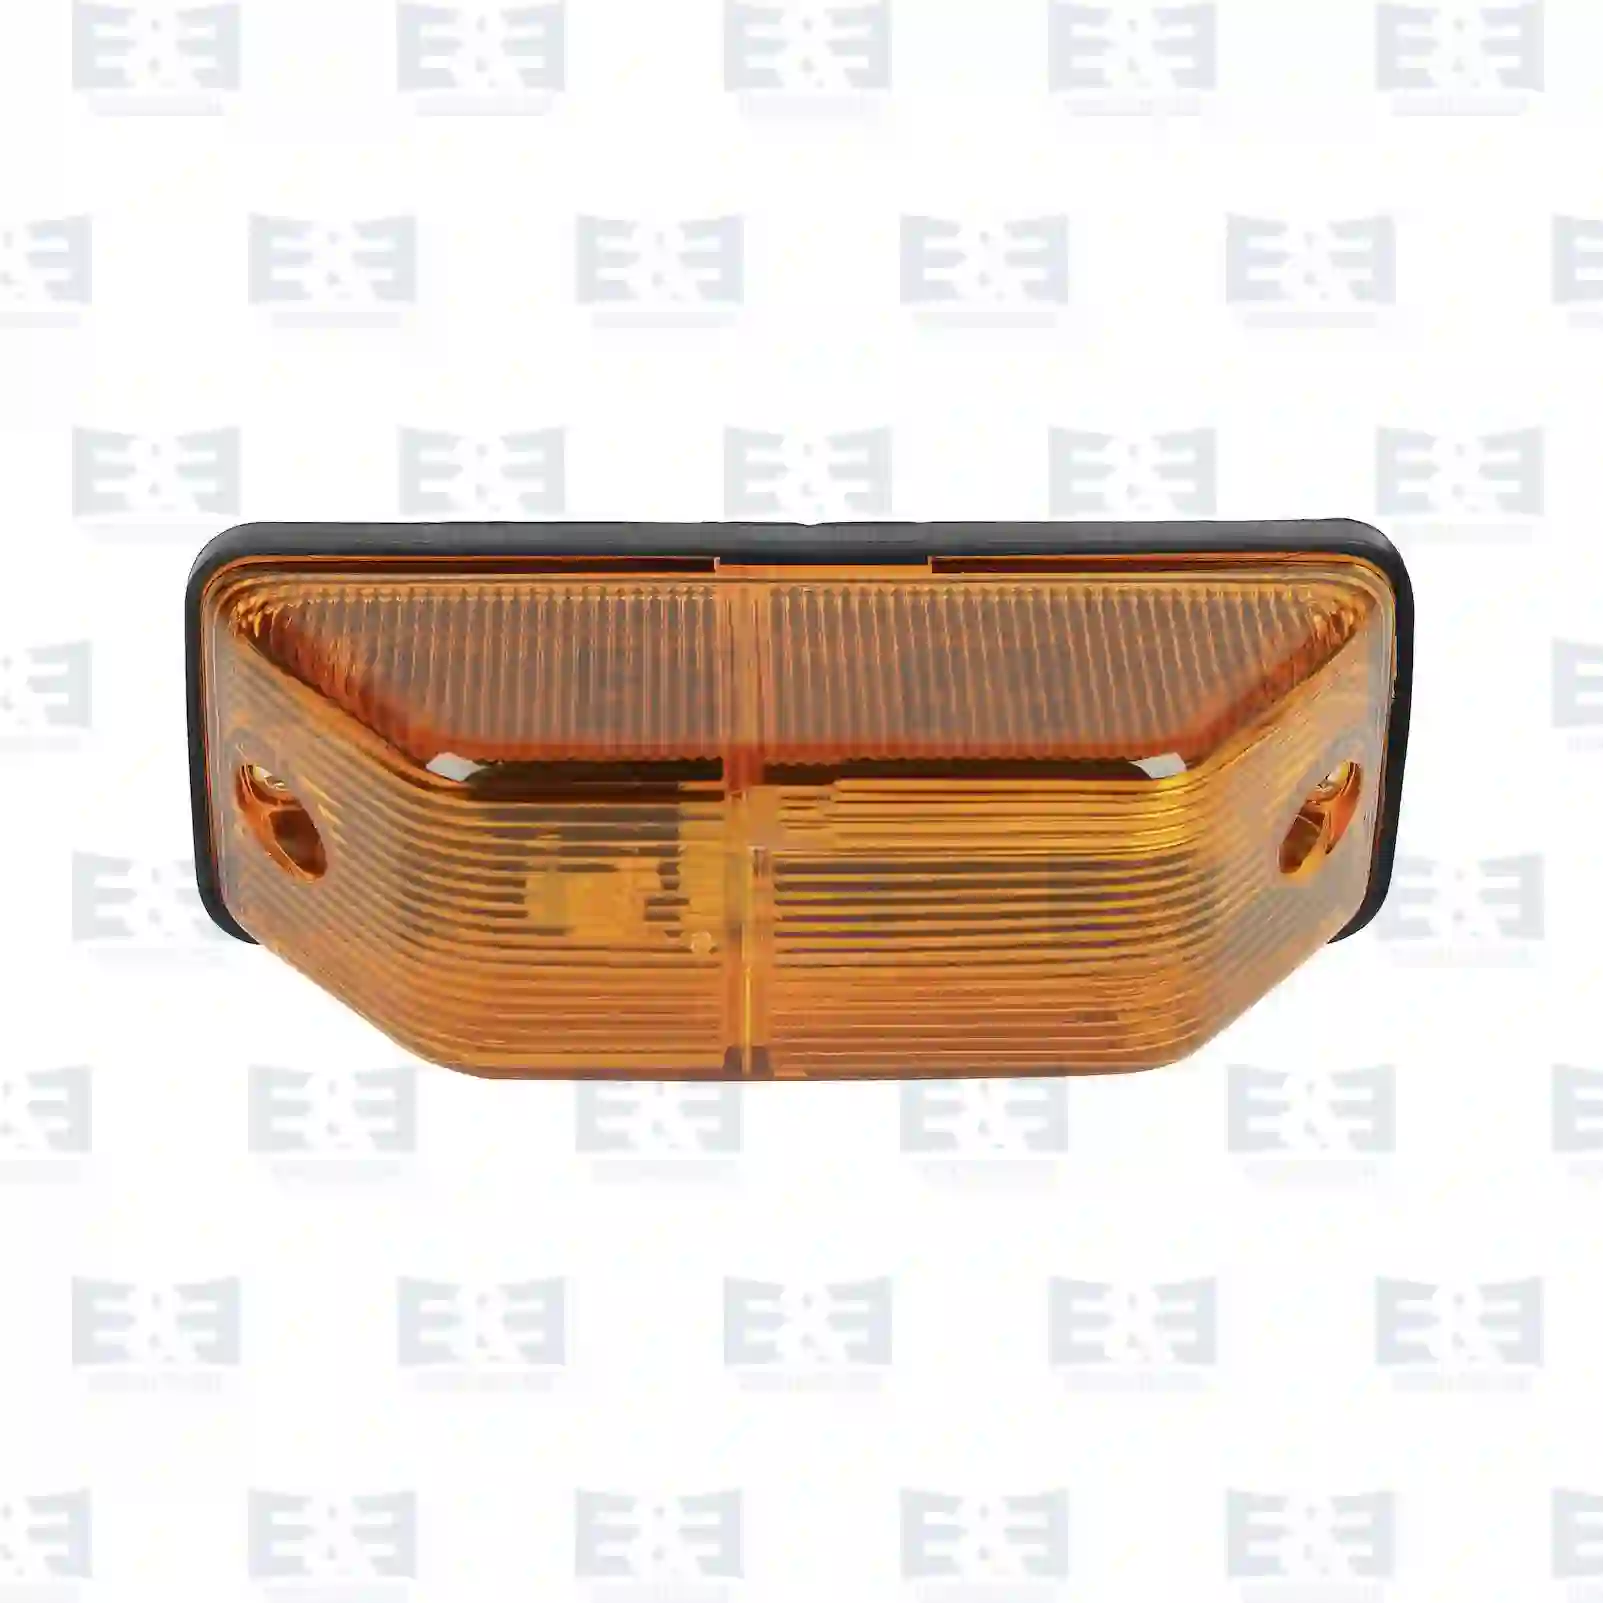 Turn signal lamp, lateral, left, without bulb, 2E2290798, 0888977, 888977, 81252256459, 0018203921, 150314200, 70305330 ||  2E2290798 E&E Truck Spare Parts | Truck Spare Parts, Auotomotive Spare Parts Turn signal lamp, lateral, left, without bulb, 2E2290798, 0888977, 888977, 81252256459, 0018203921, 150314200, 70305330 ||  2E2290798 E&E Truck Spare Parts | Truck Spare Parts, Auotomotive Spare Parts